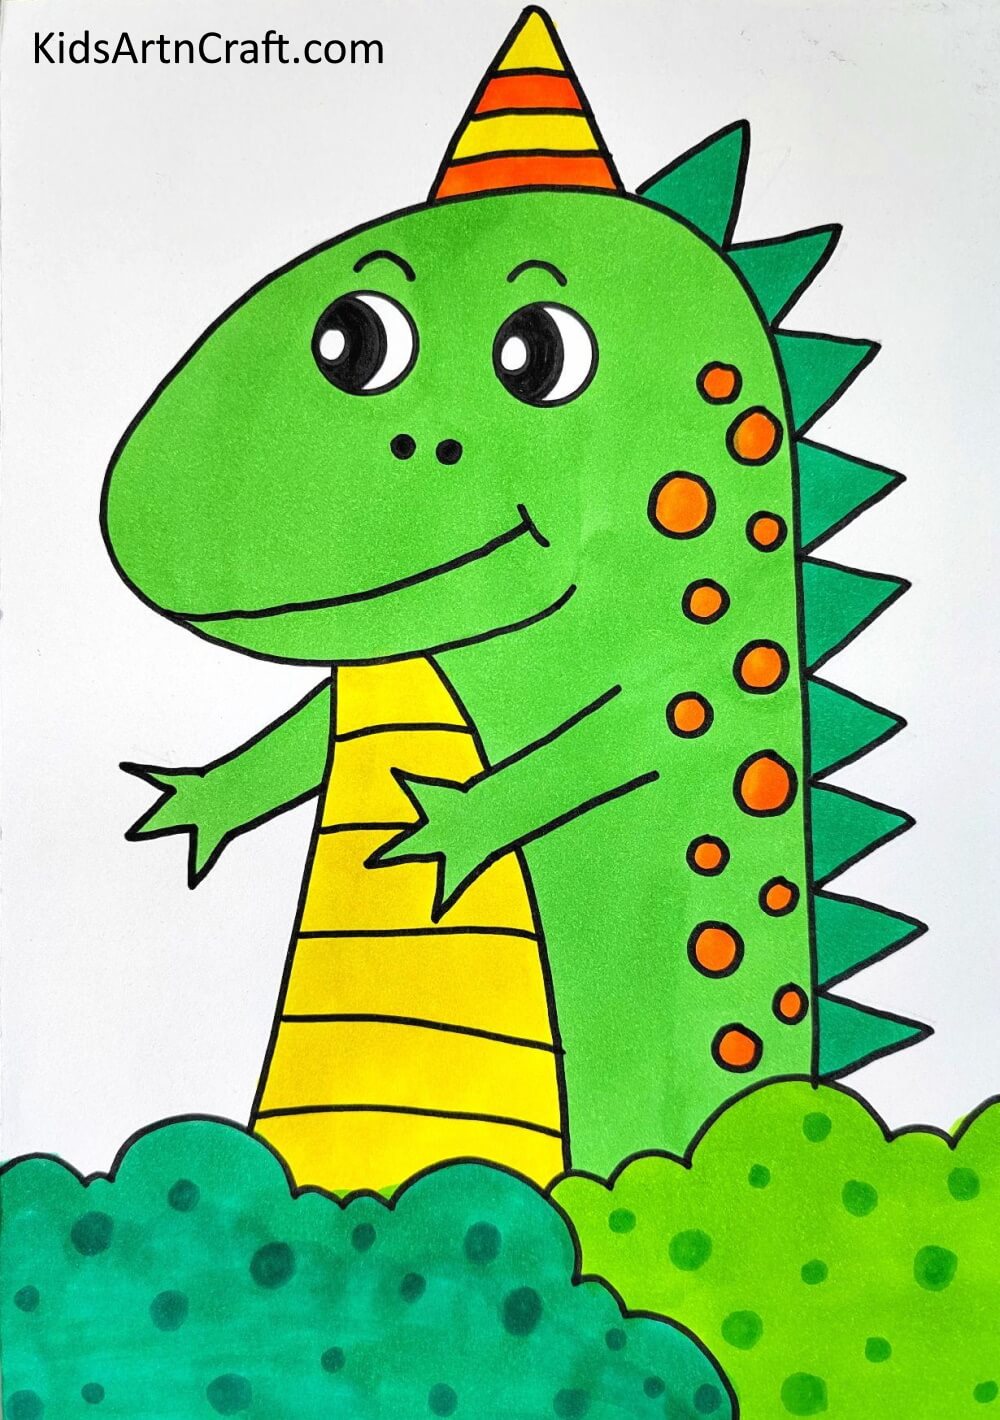 This Is The Final Look Of our Easy Dinosaur Art! - Get a Handle on Producing a Dinosaur Easy Directions